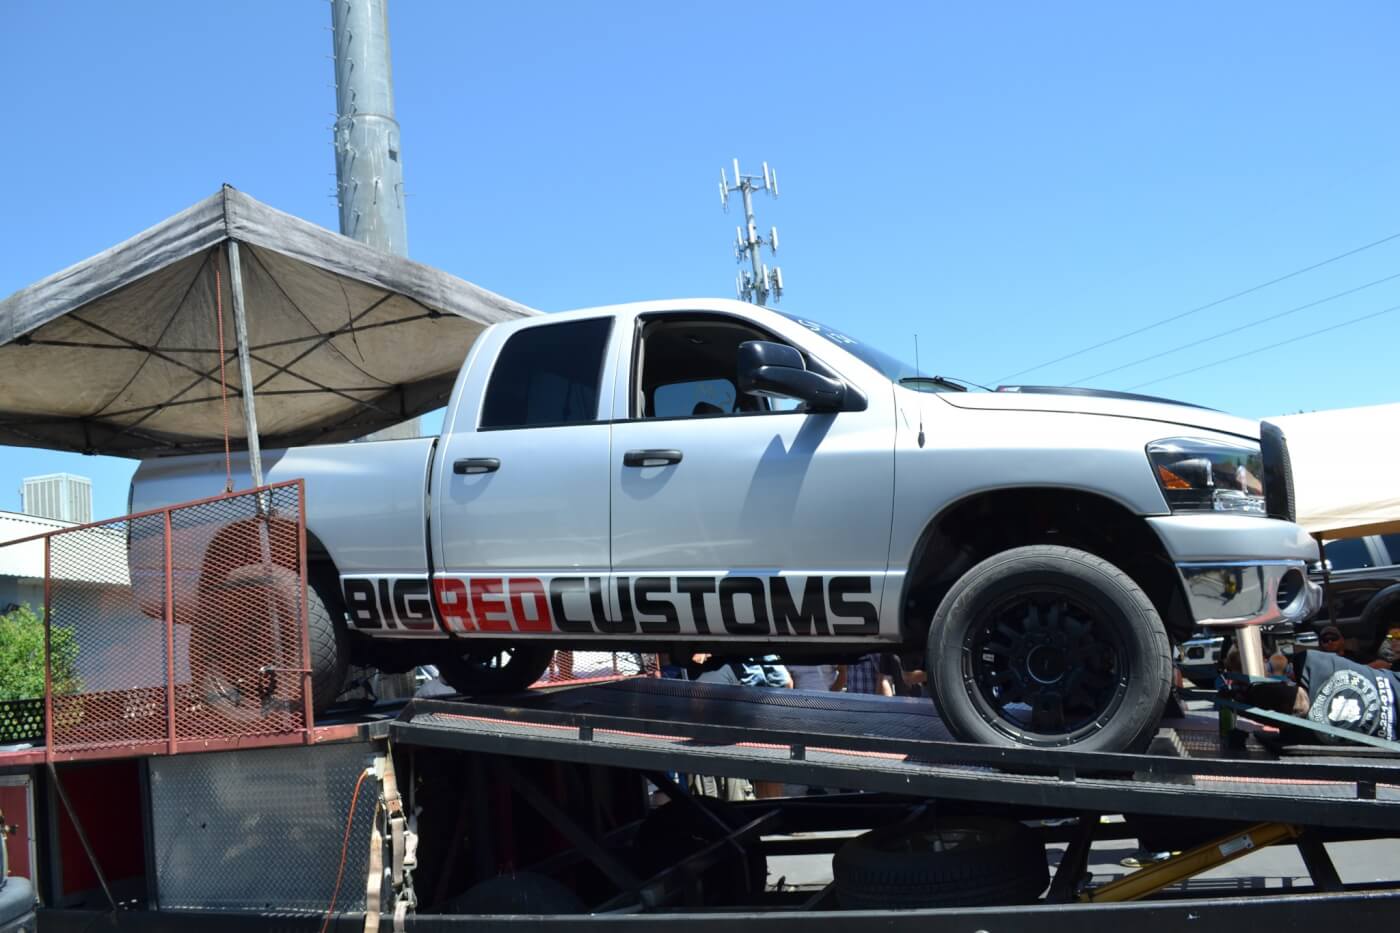 Some competitors who had run at the track decided to test their rides on the dyno as well. This Dodge from Big Red Customs laid down close to 700 rear-wheel horsepower with a 73mm turbocharger and some 250 hp injectors from Industrial Injection.